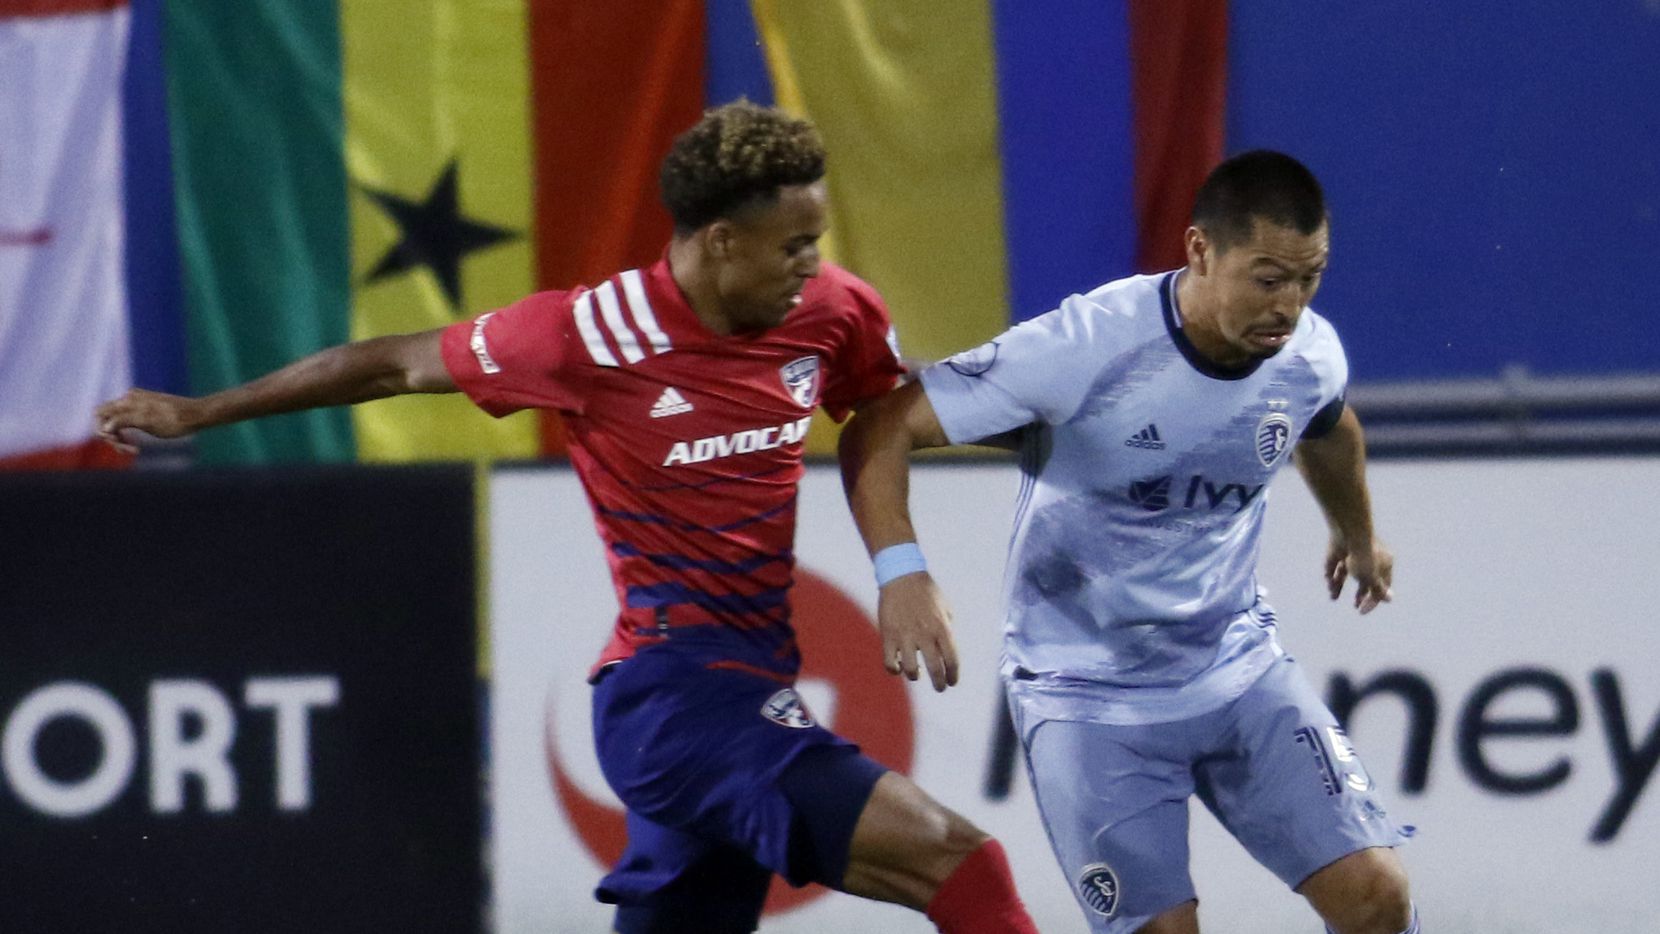 FC Dallas' Bryan Reynolds (14), left, challenges Sporting KC's Roger Espinoza (15) who works to maneuver the ball inside during first half action. The two teams, both members of the Western Conference of MLS, played their match at Toyota Stadium in Frisco on October 14, 2020.